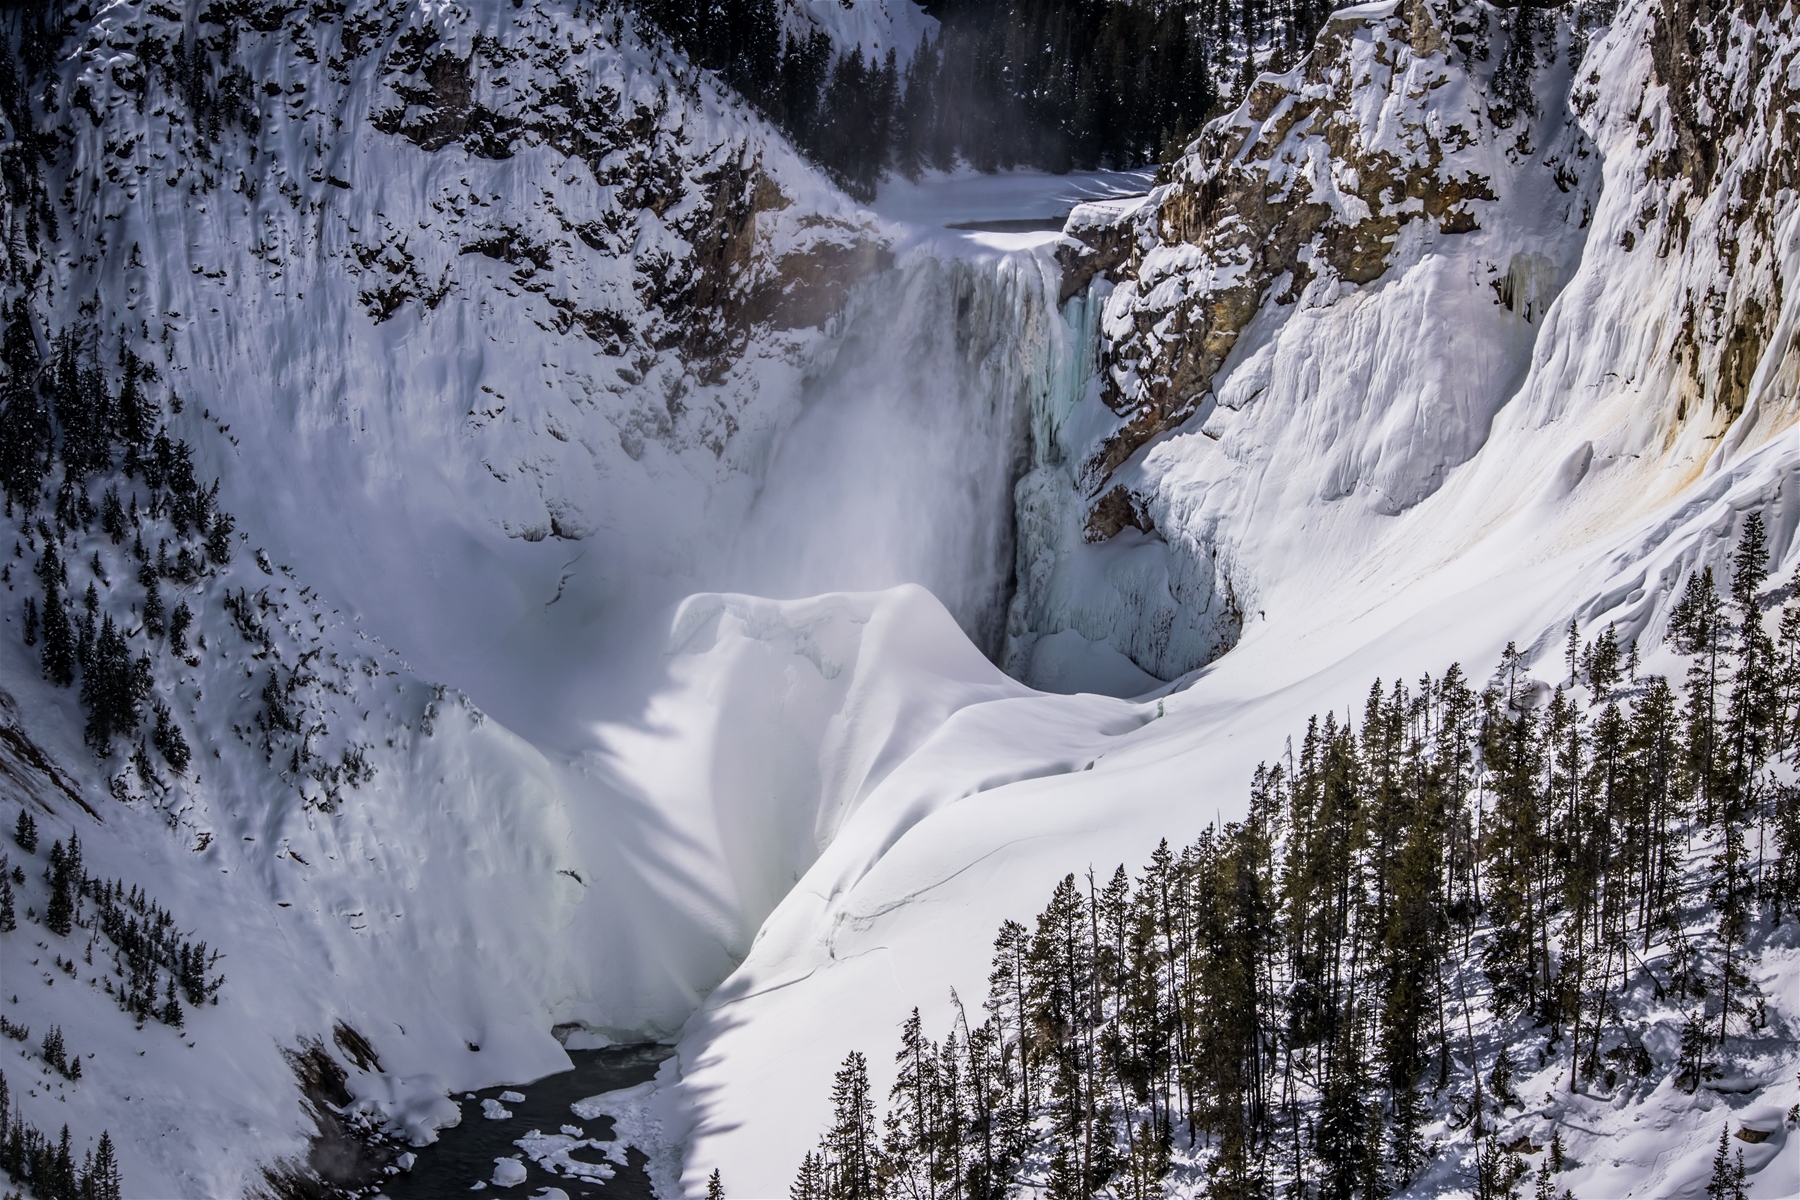 Grand Canyon of the Yellowstone in Winter